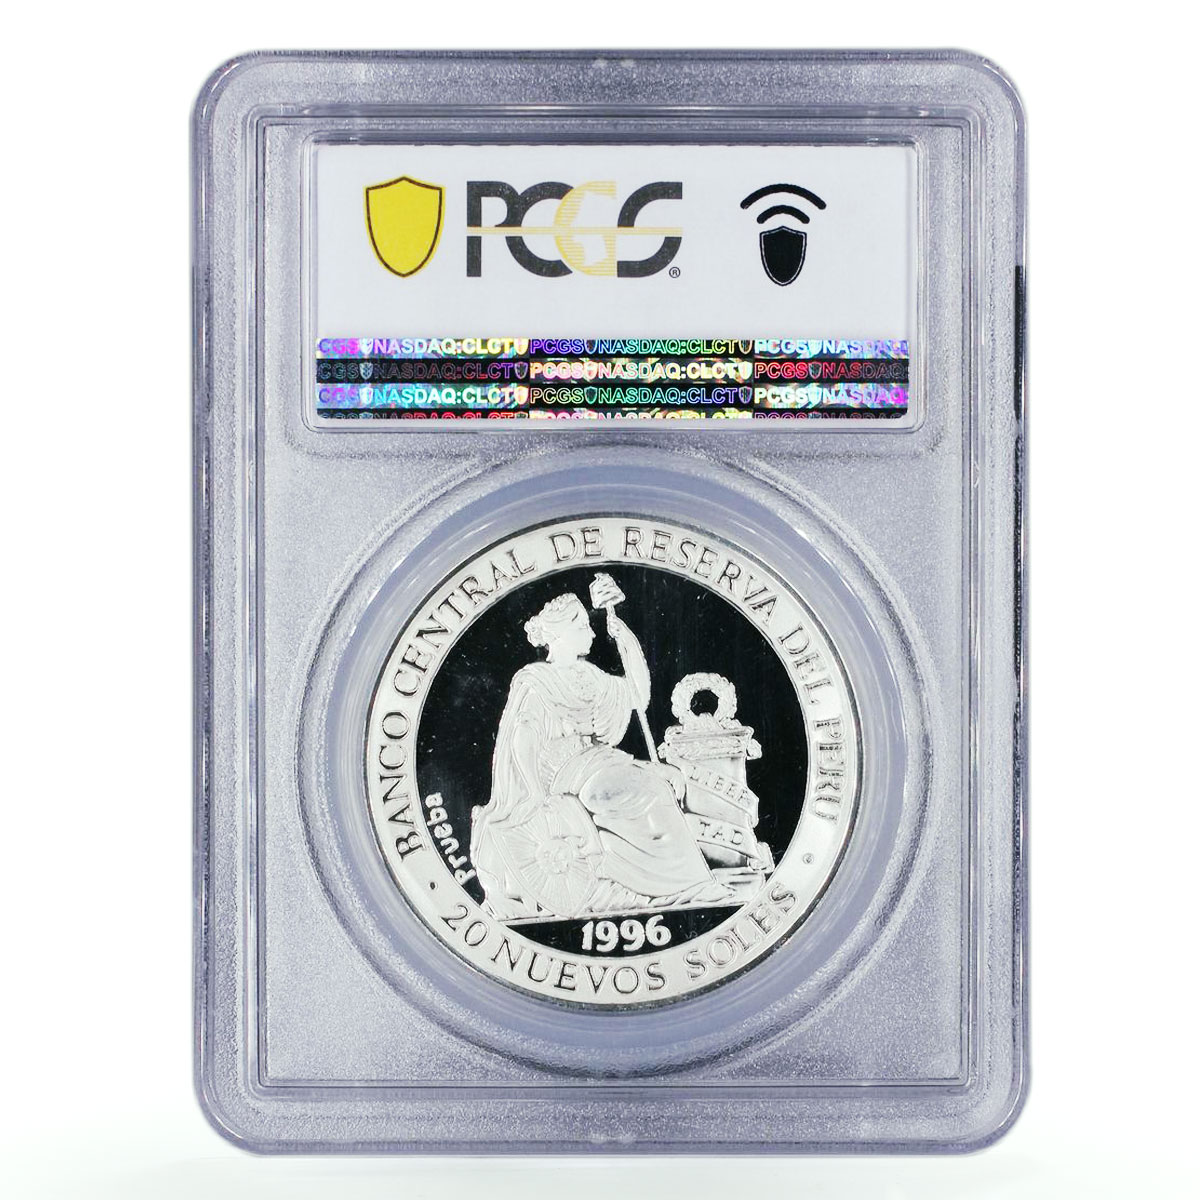 Peru 20 soles Berlin Olympic Games Torchrunner PR68 PCGS probe Ag coin 1996